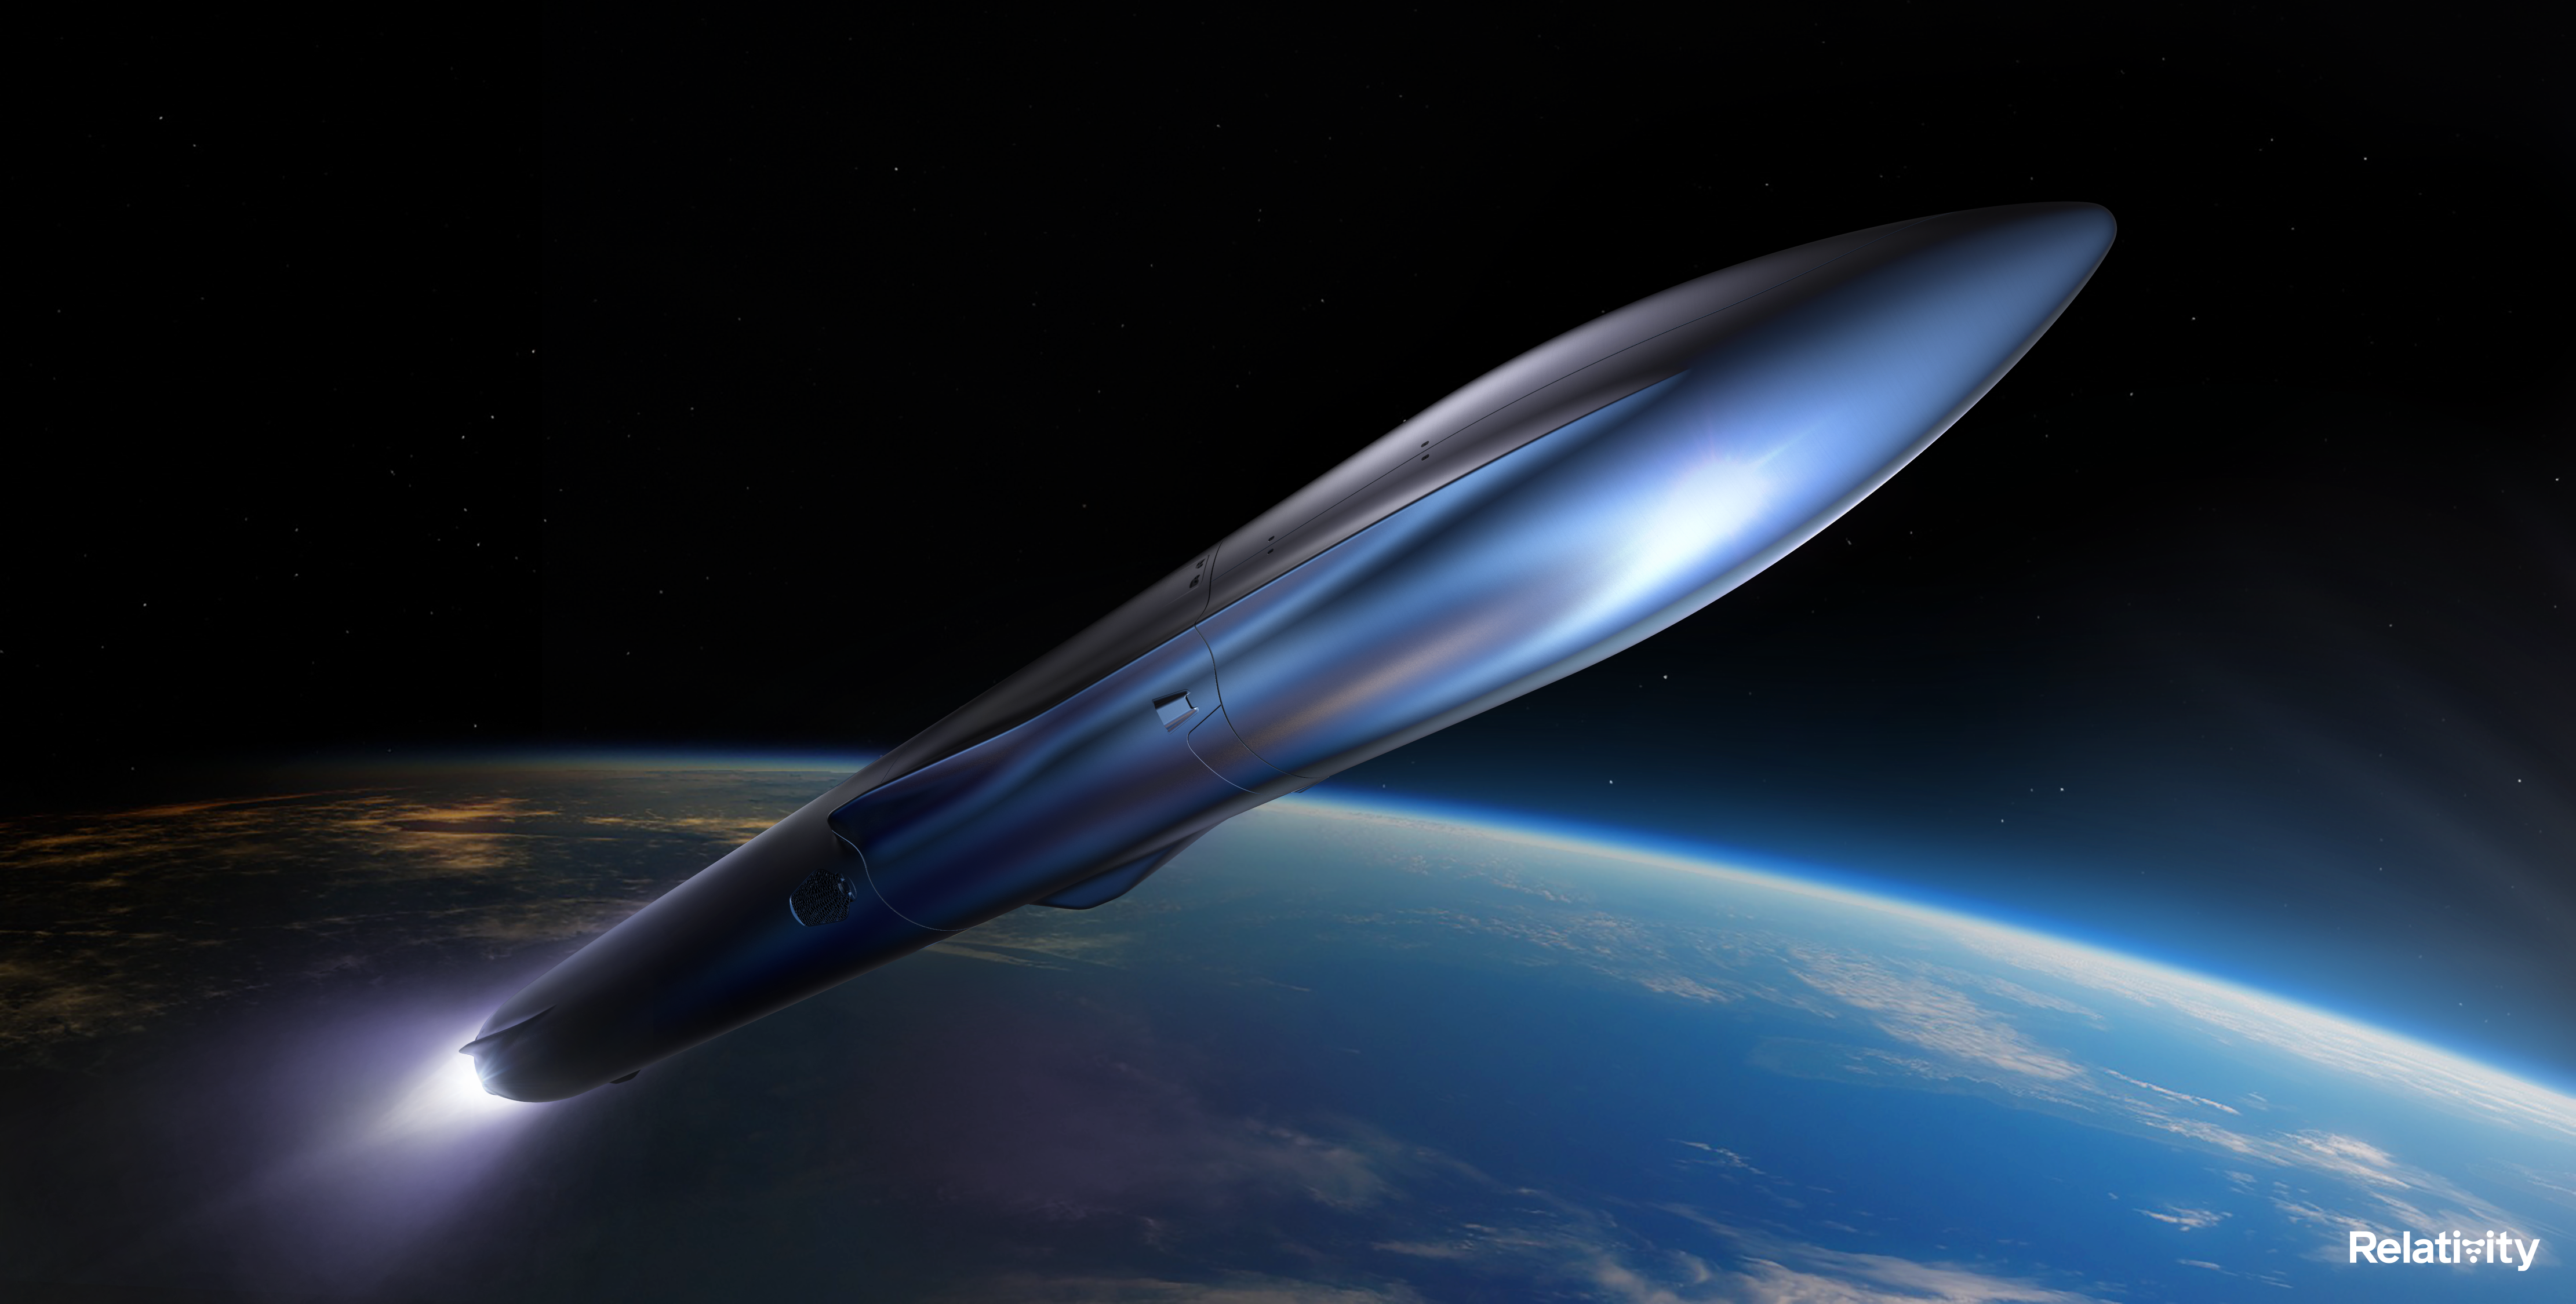 Relativity Space's Terran R medium-lift launch vehicle will debut in 2024